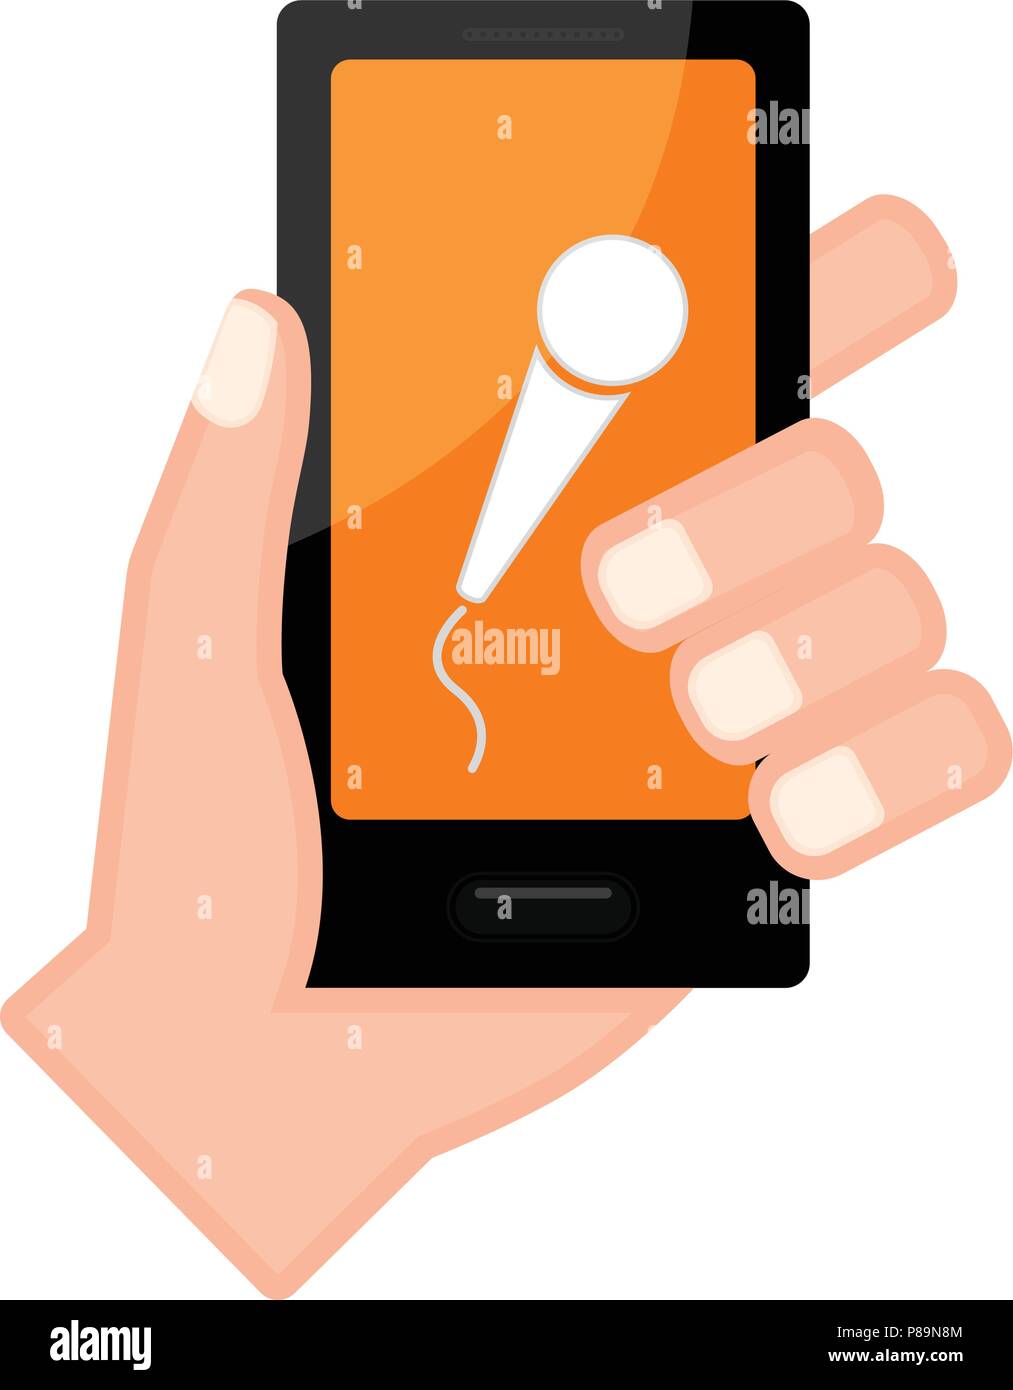 Hand holding a smartphone with a microphone icon Stock Vector